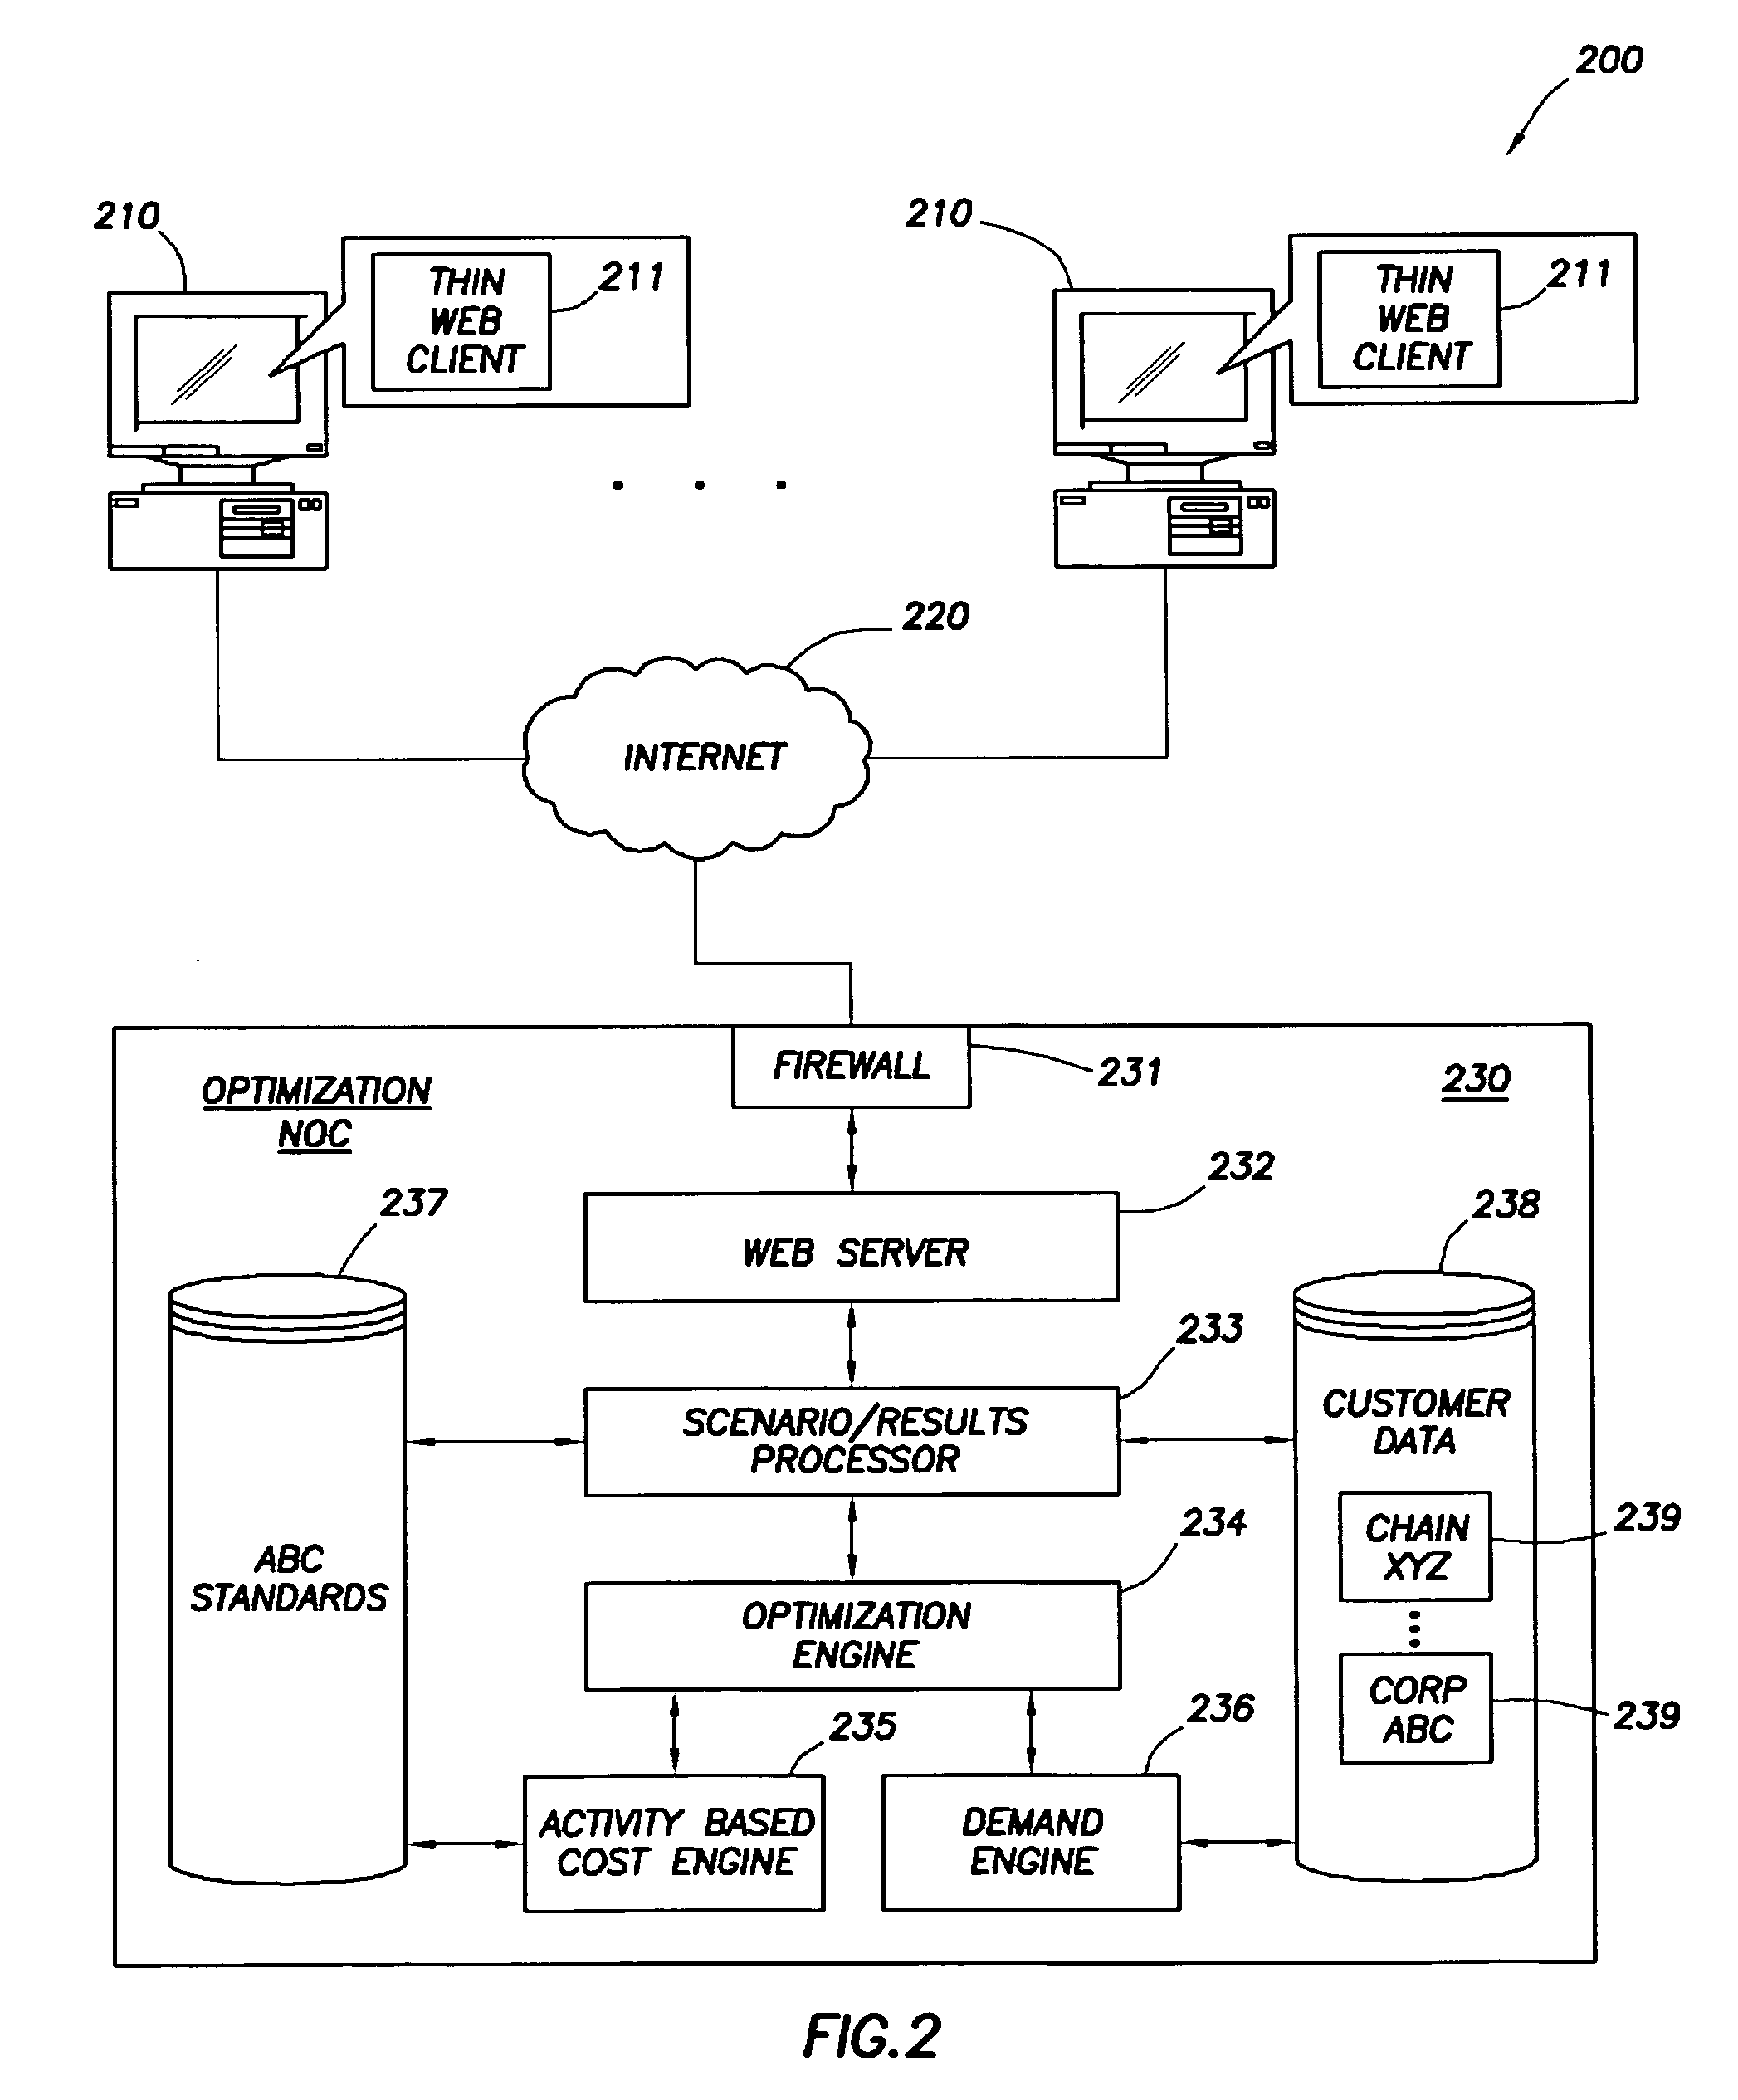 Apparatus and method for selective merchandise price optimization